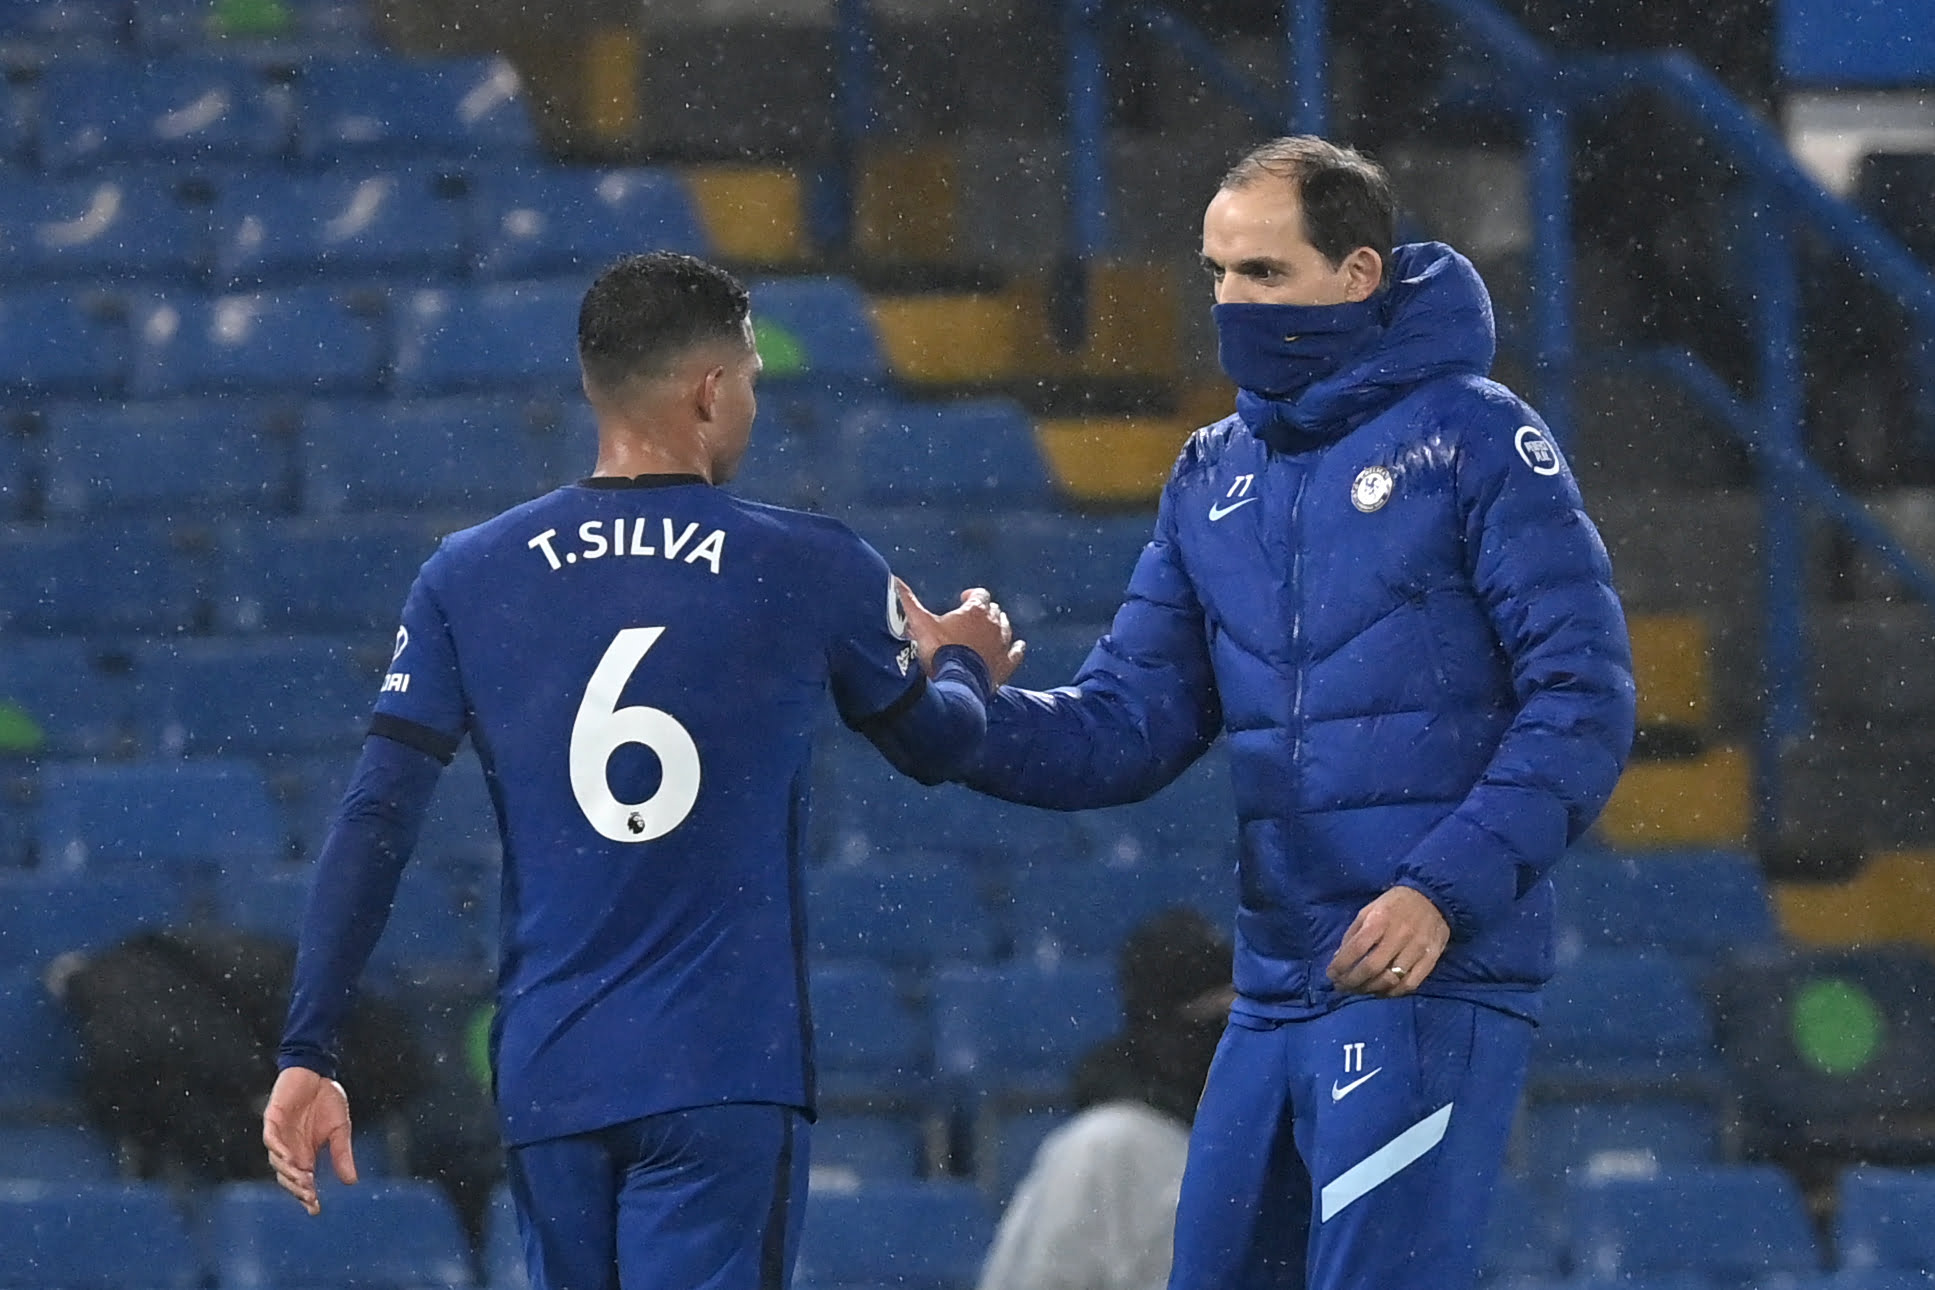 Chelsea players rated in lacklustre draw vs Wolves (Chelsea manager Thomas Tuchel is seen in the photo)